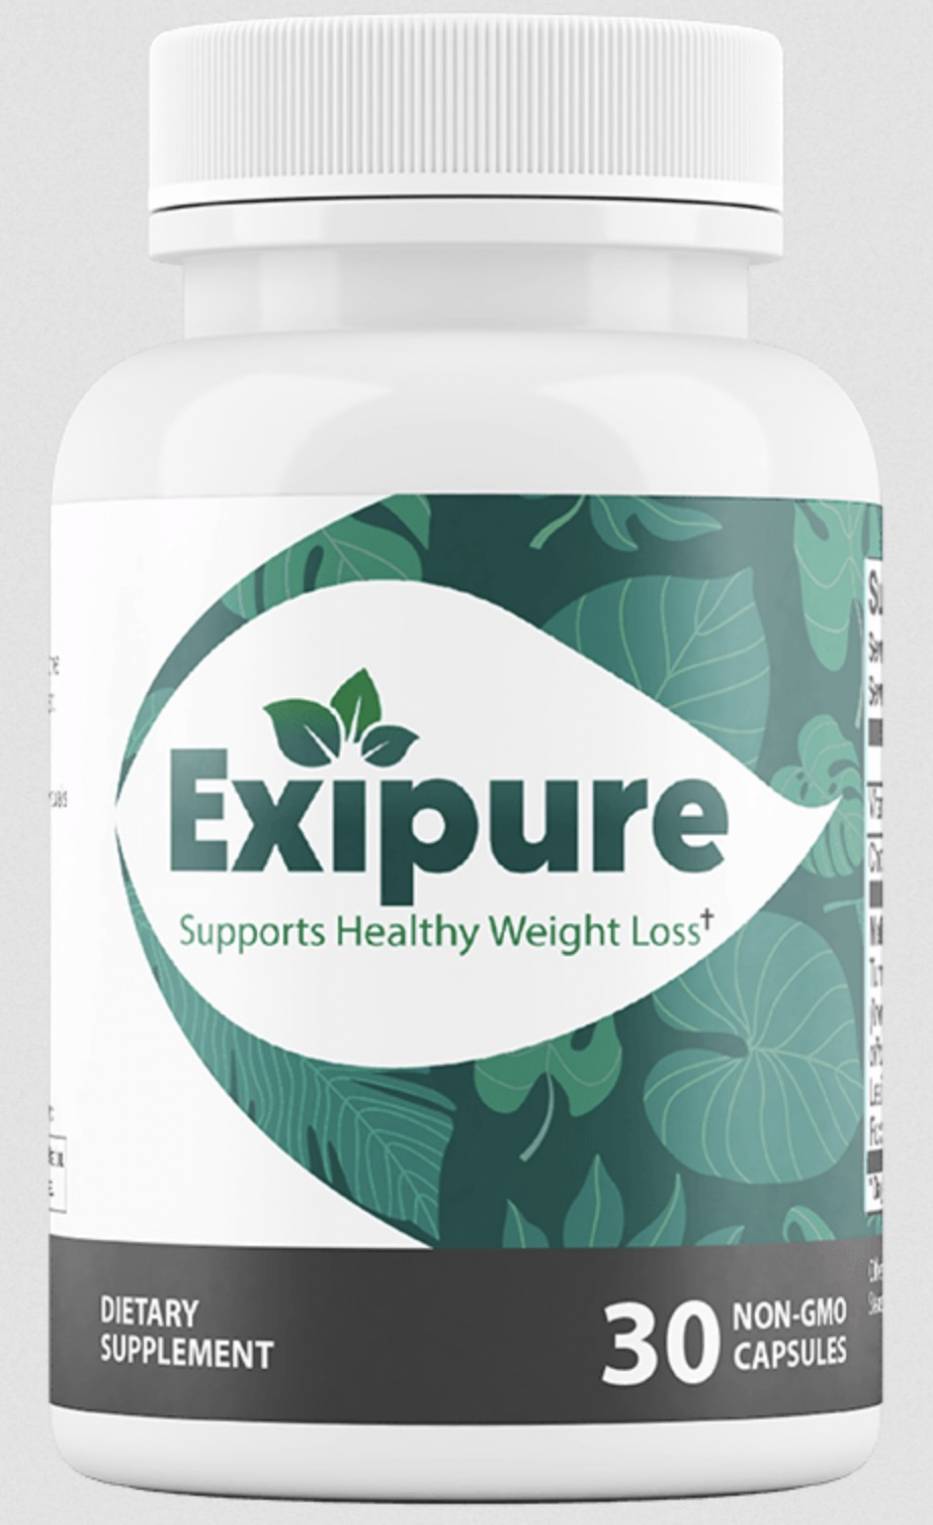 Is Exipure Available In New Zealand